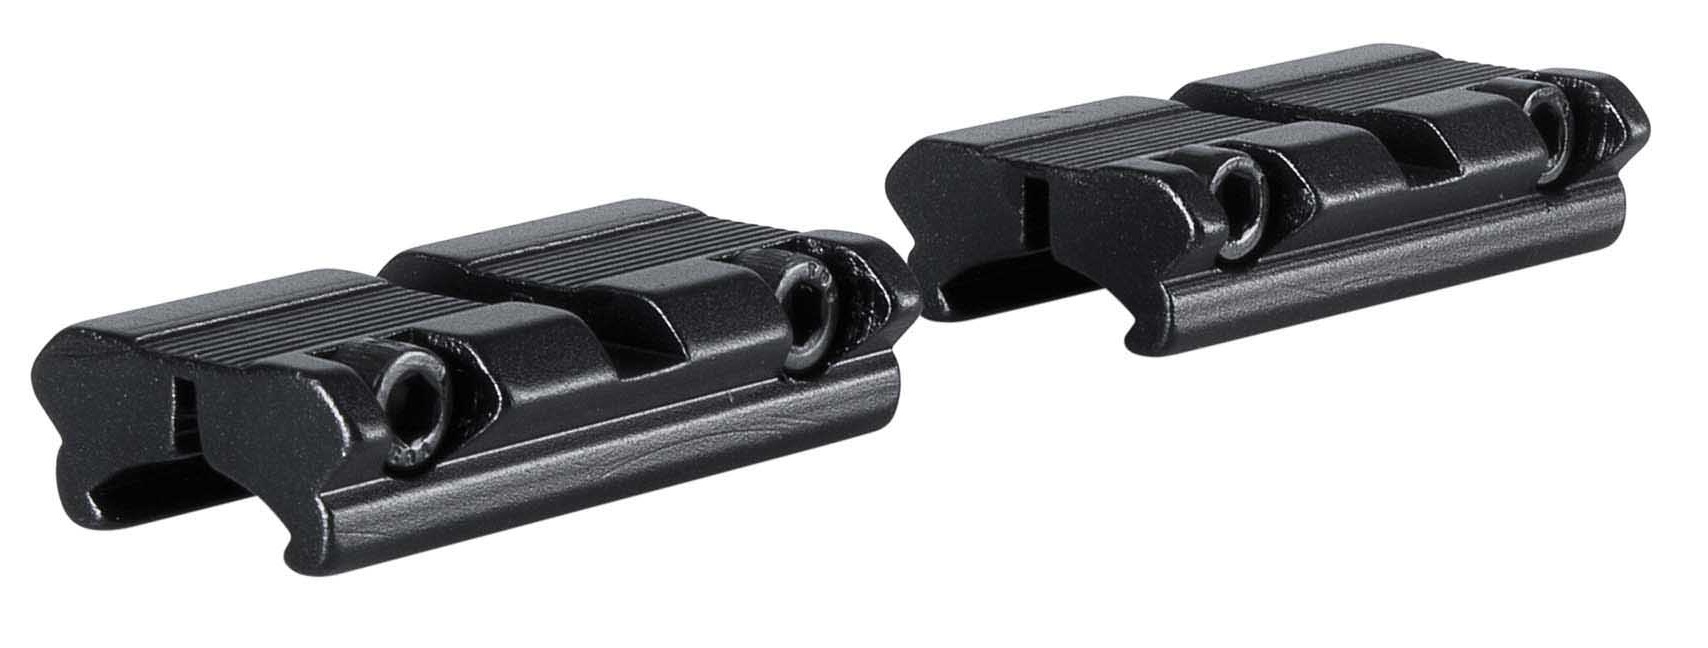 Adapter rail 11 mm to 21 mm for Picatinny rail